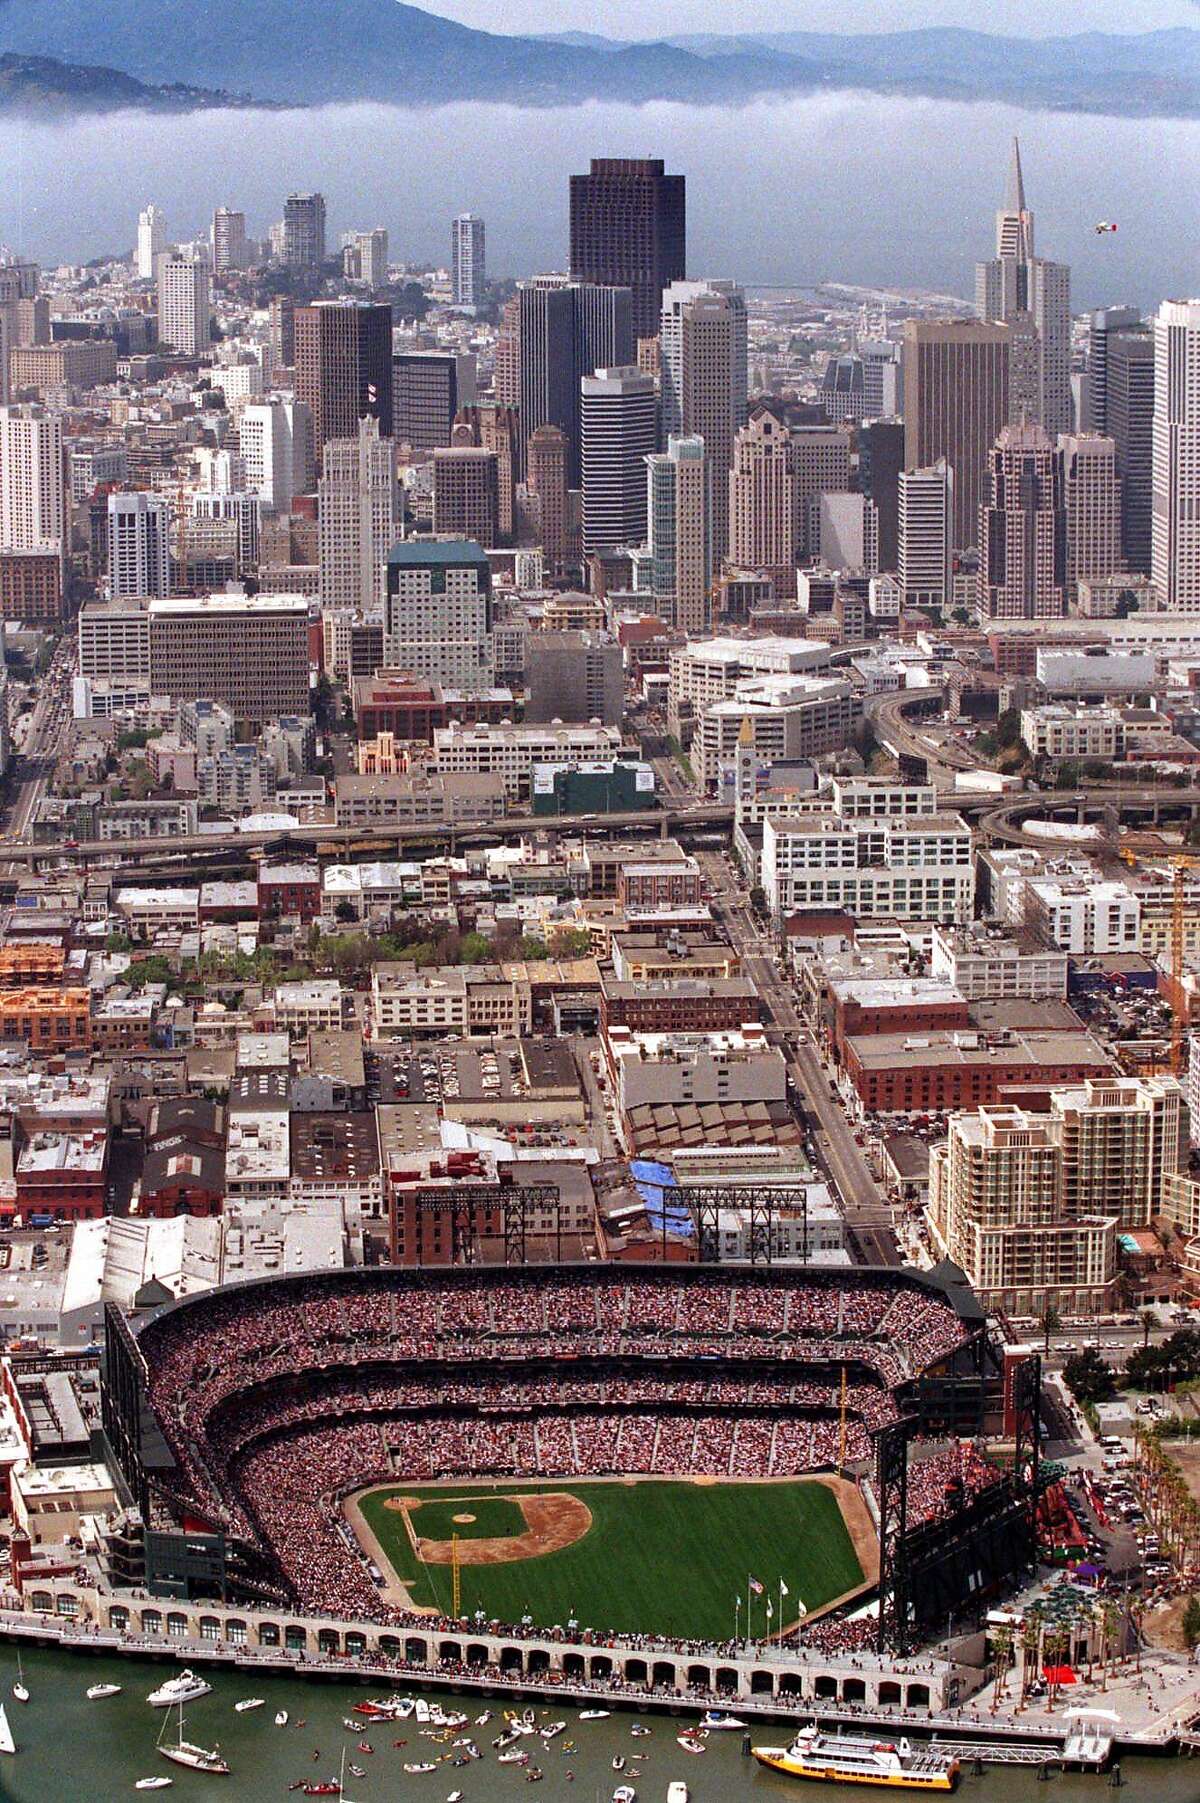 Pacific Bell Park is seen with the San Francisco skyline and Marin Hills in the background in an aerial photograph taken on the San Francisco Giants' home opener Tuesday, April 11, 2000. The Giants' played the Los Angeles Dodgers. (AP Photo/Dan Krauss)